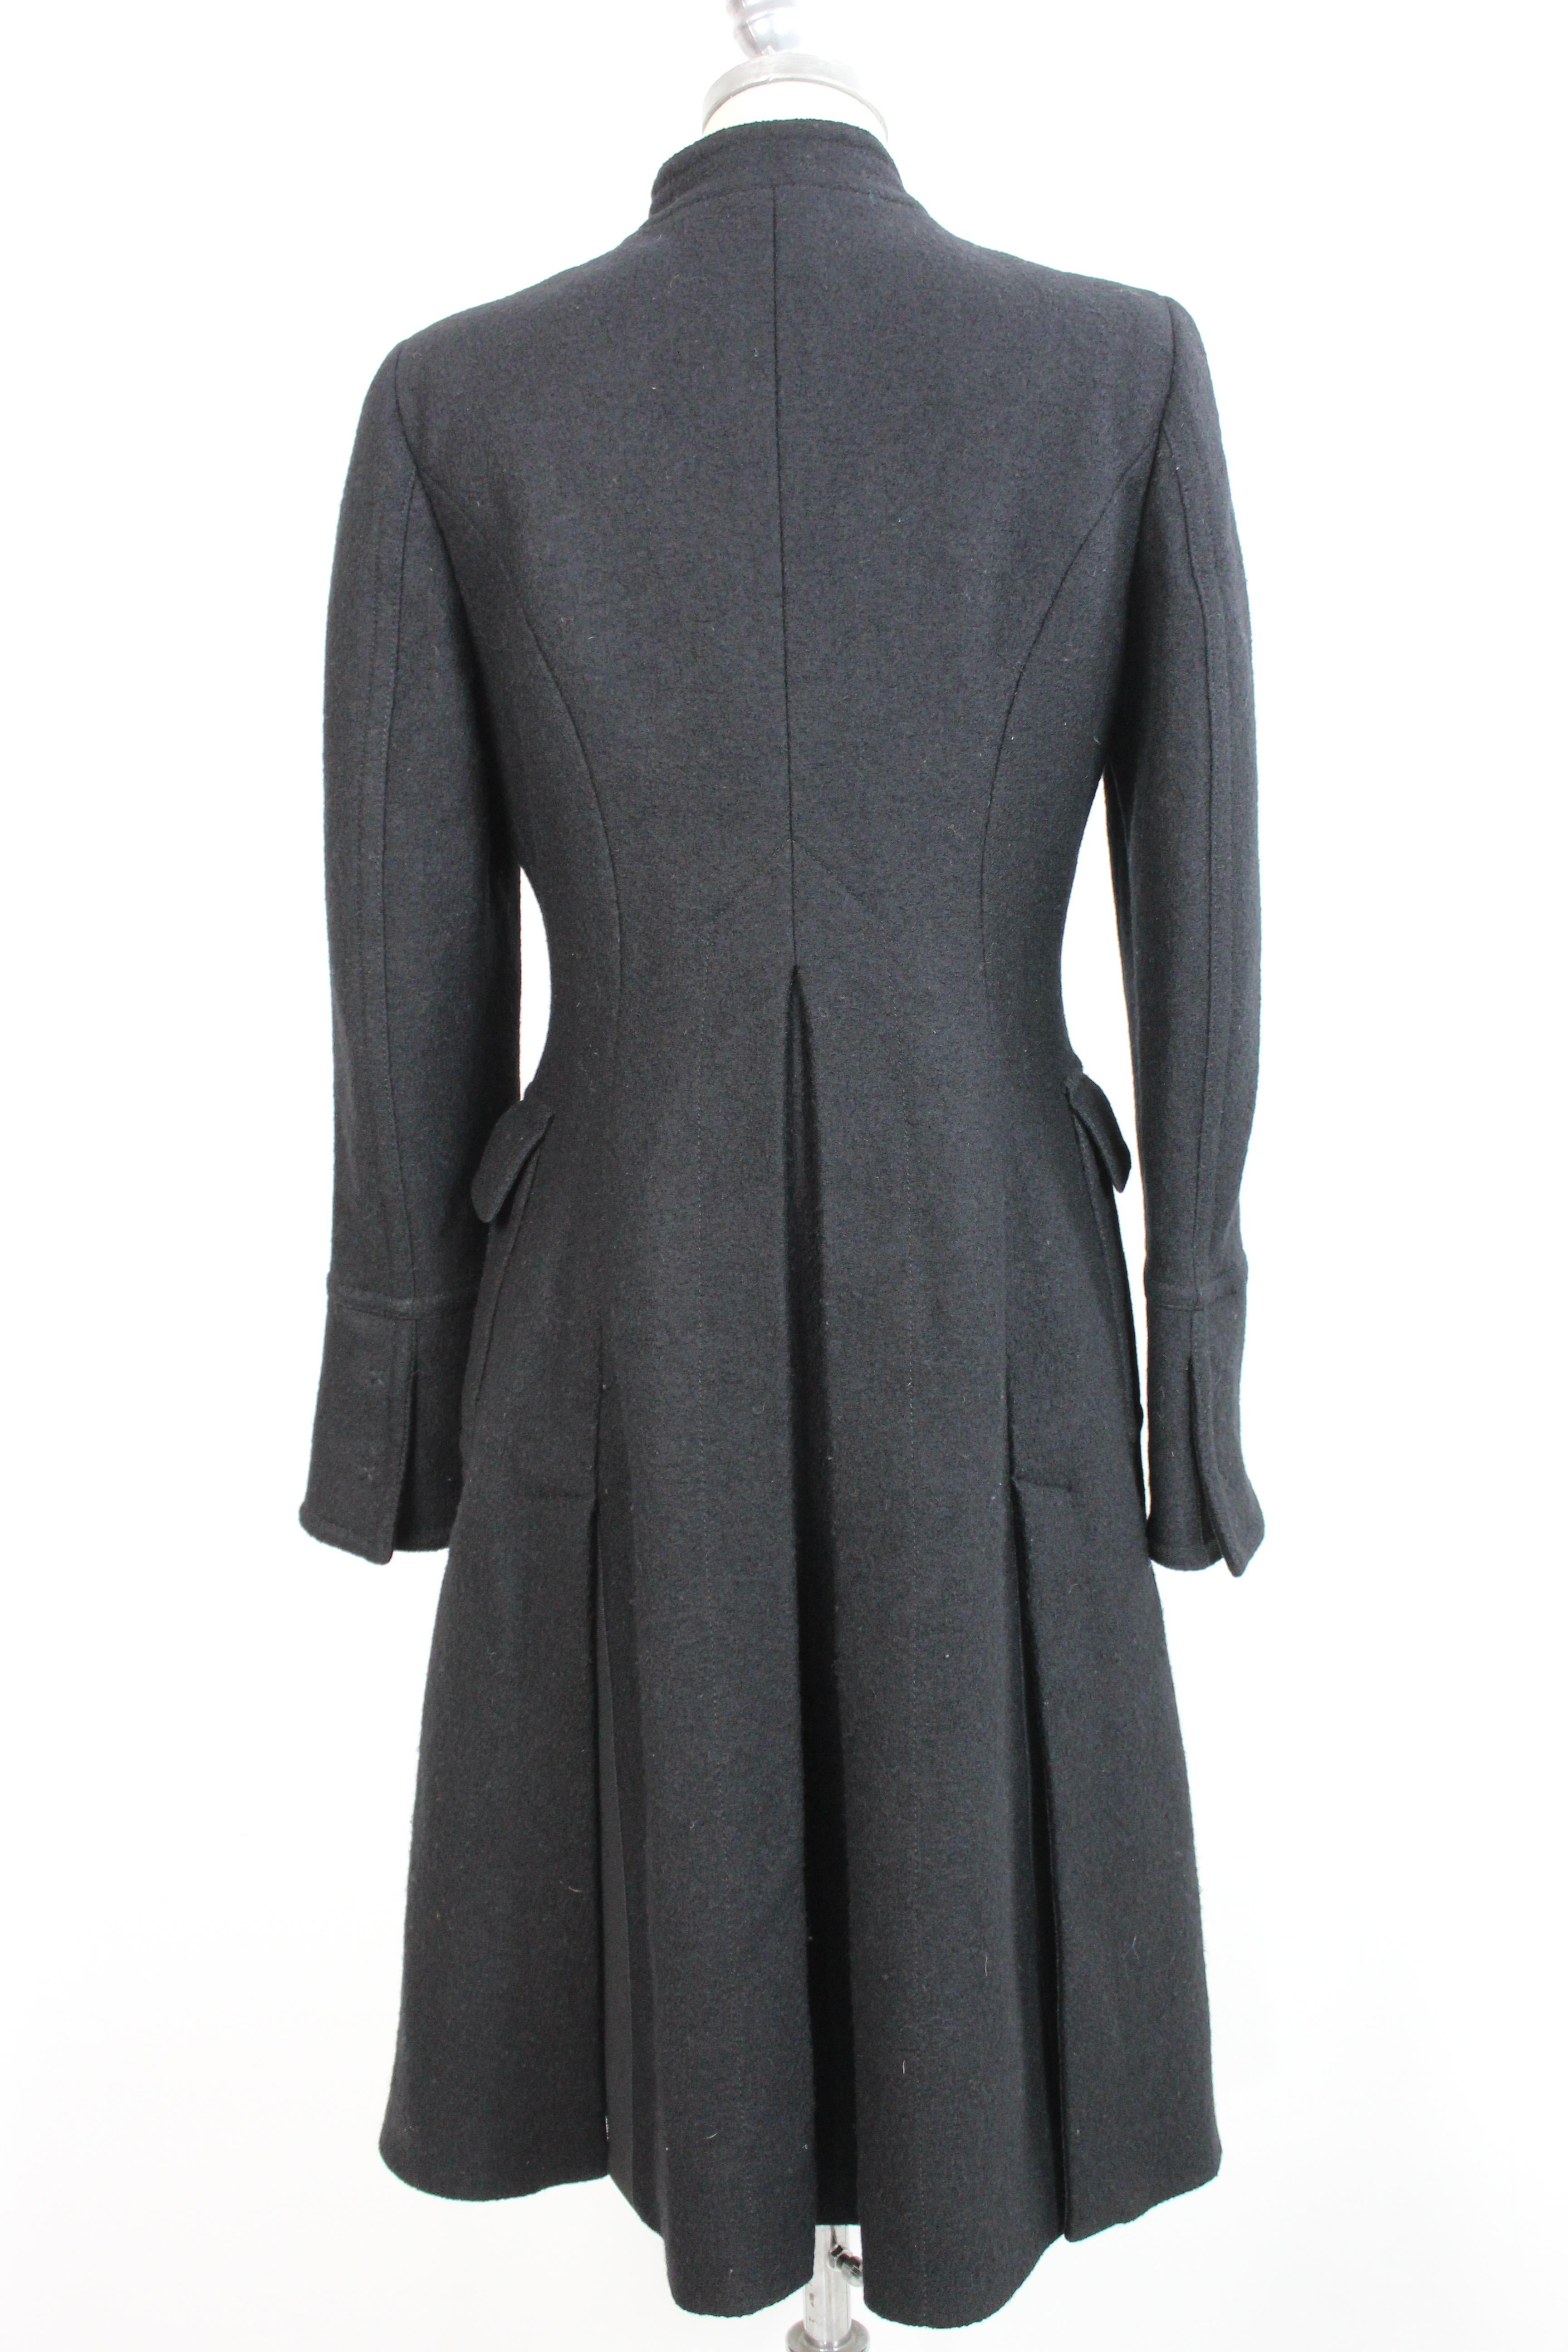 Alberta Ferretti vintage women's coat, black, 100% virgin wool. Long model, hidden buttons closure, two pockets on the sides. 2000s. Made in Italy. Excellent vintage conditions.

Size: 44 It 10 Us 12 Uk

Shoulder: 44 cm
Bust / Chest: 50 cm
Sleeve: